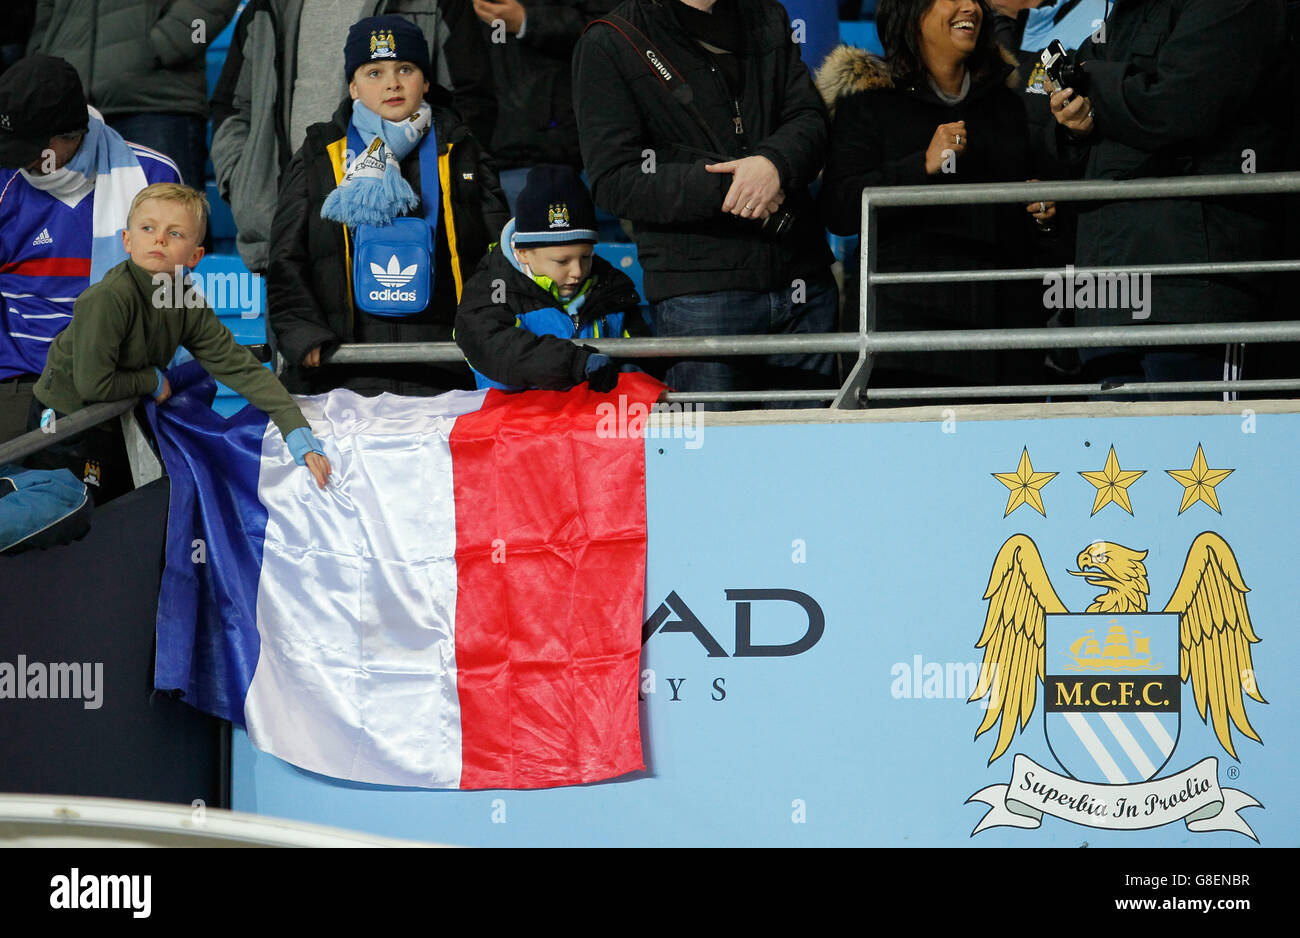 Manchester City v Liverpool - Barclays Premier League - Etihad Stadium. Young fans with the french flag at the Barclays Premier League match at the Etihad Stadium, Manchester. Stock Photo